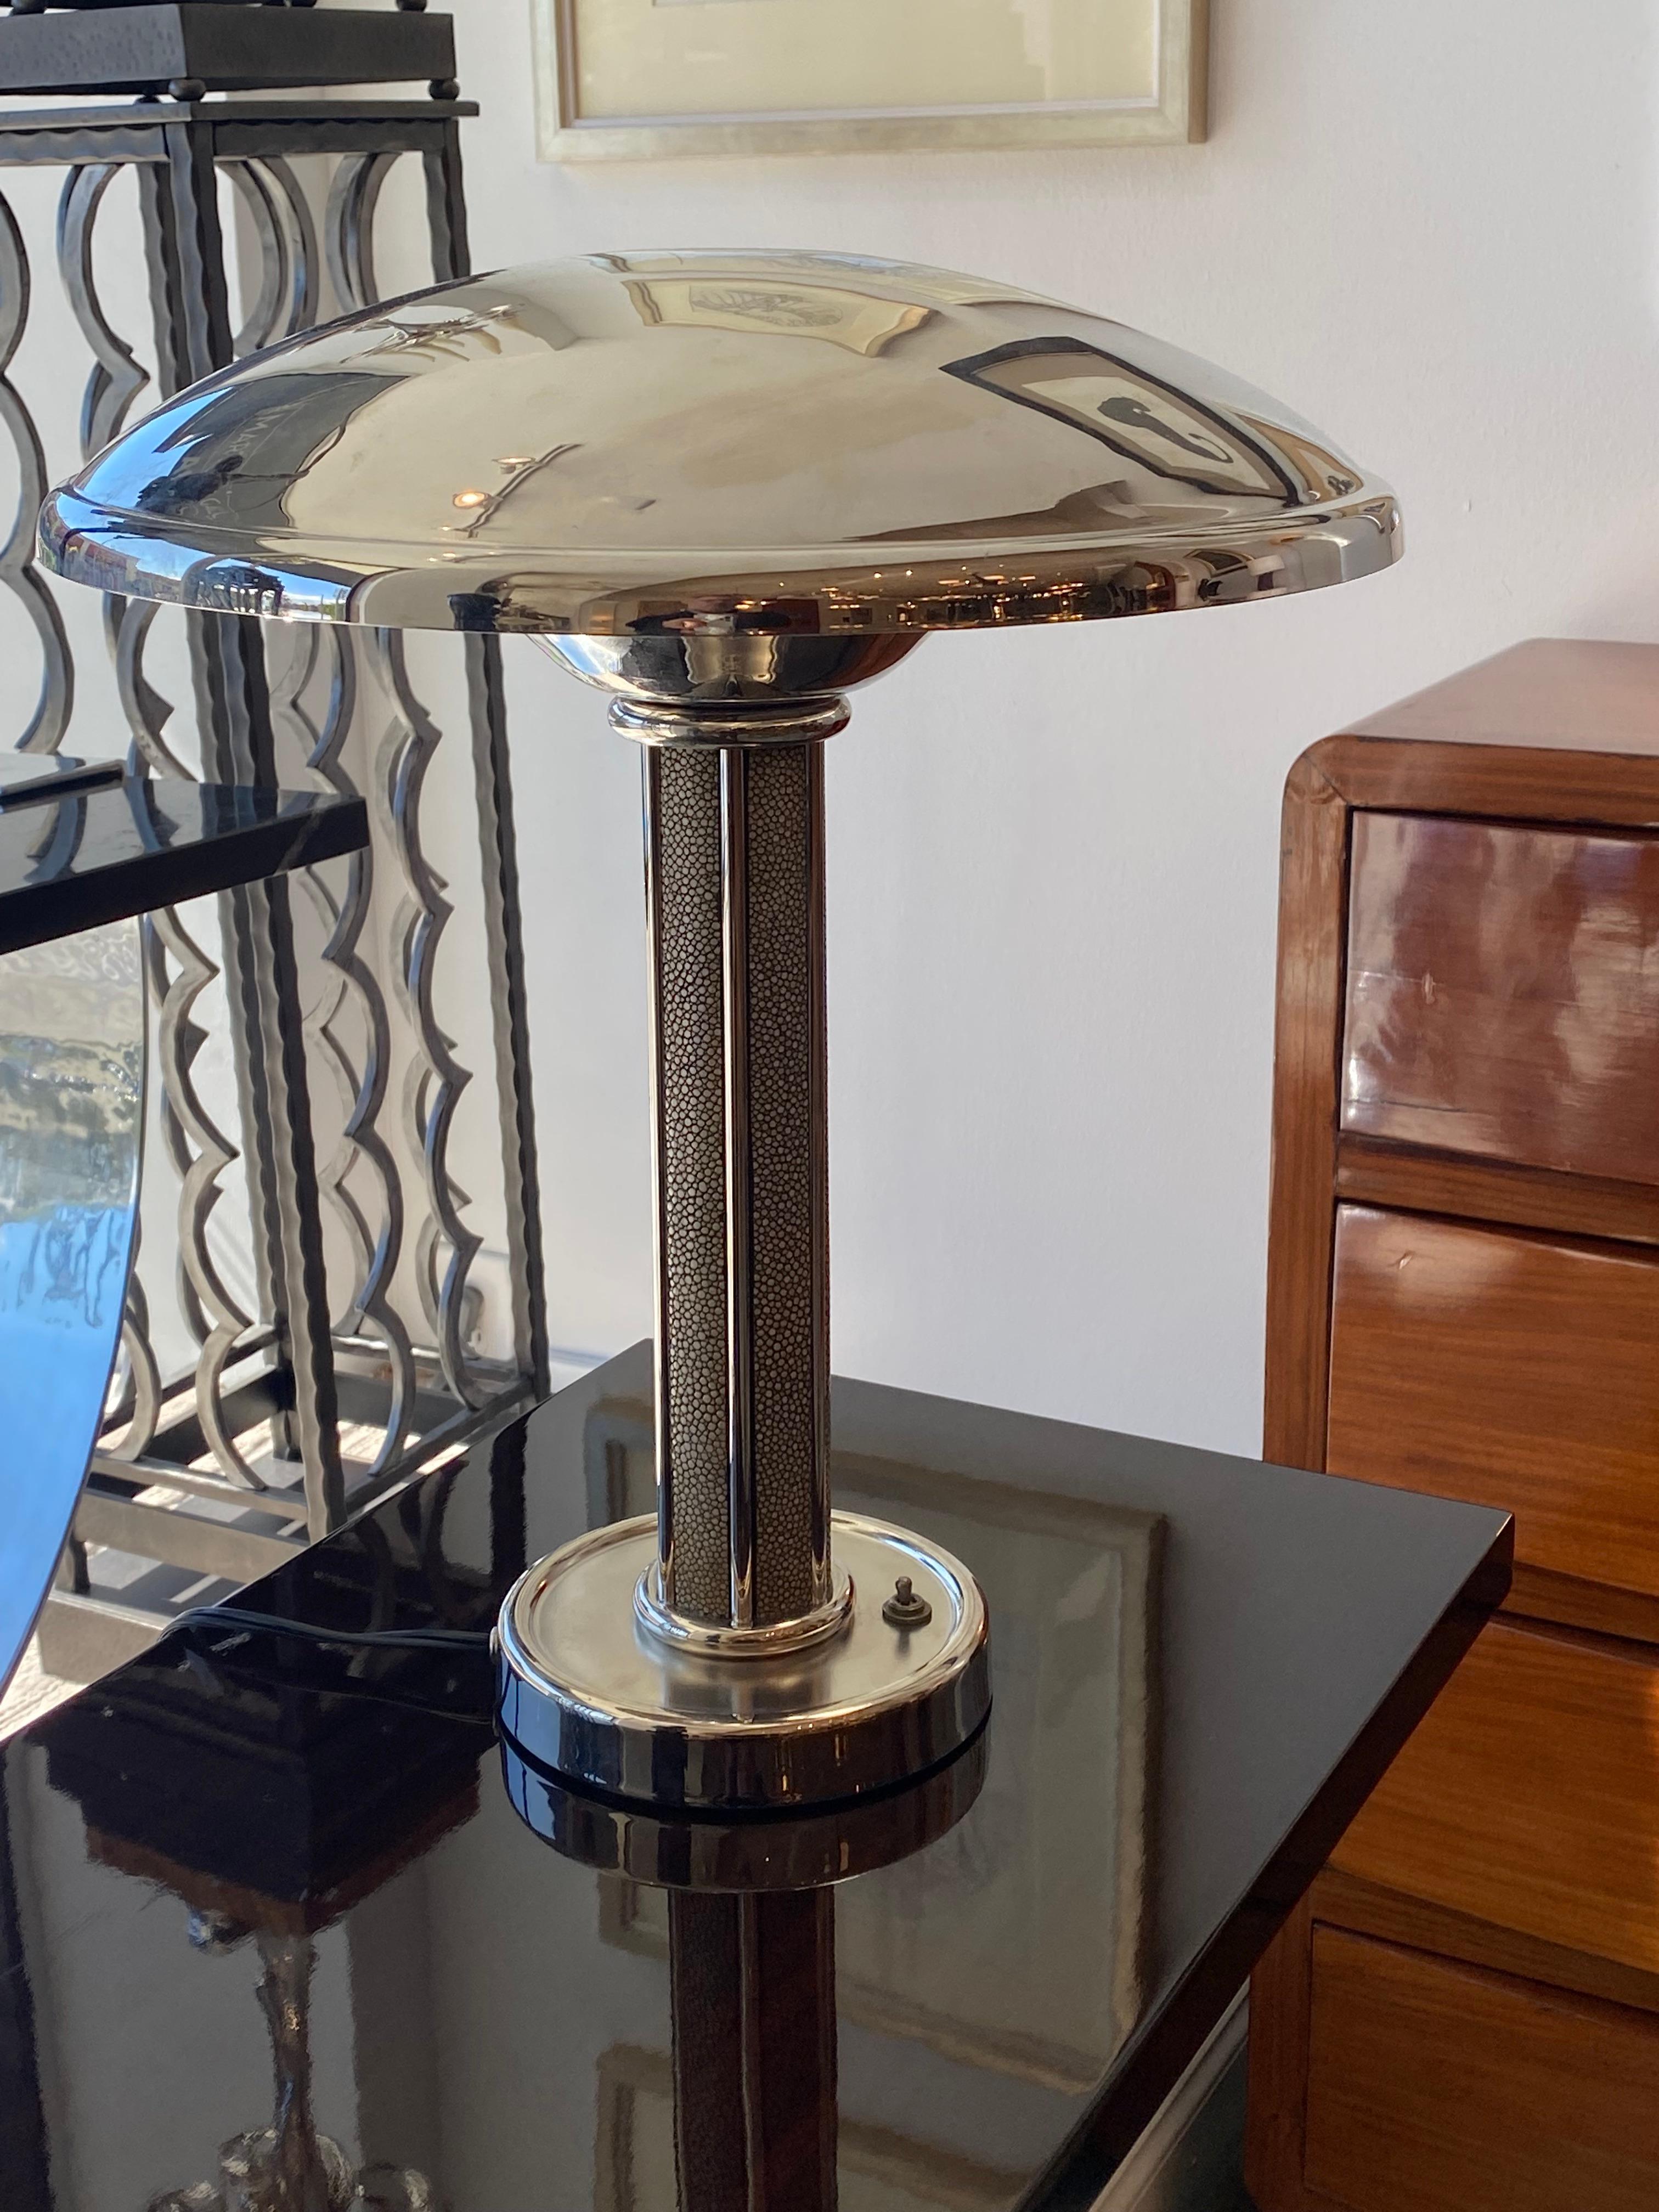 Pair of Art Deco table lamps made of Nickeled Plated metal and Shagreen details designed by George Halais.
Made in France 
Circa 1930
Signed: G. Halais.